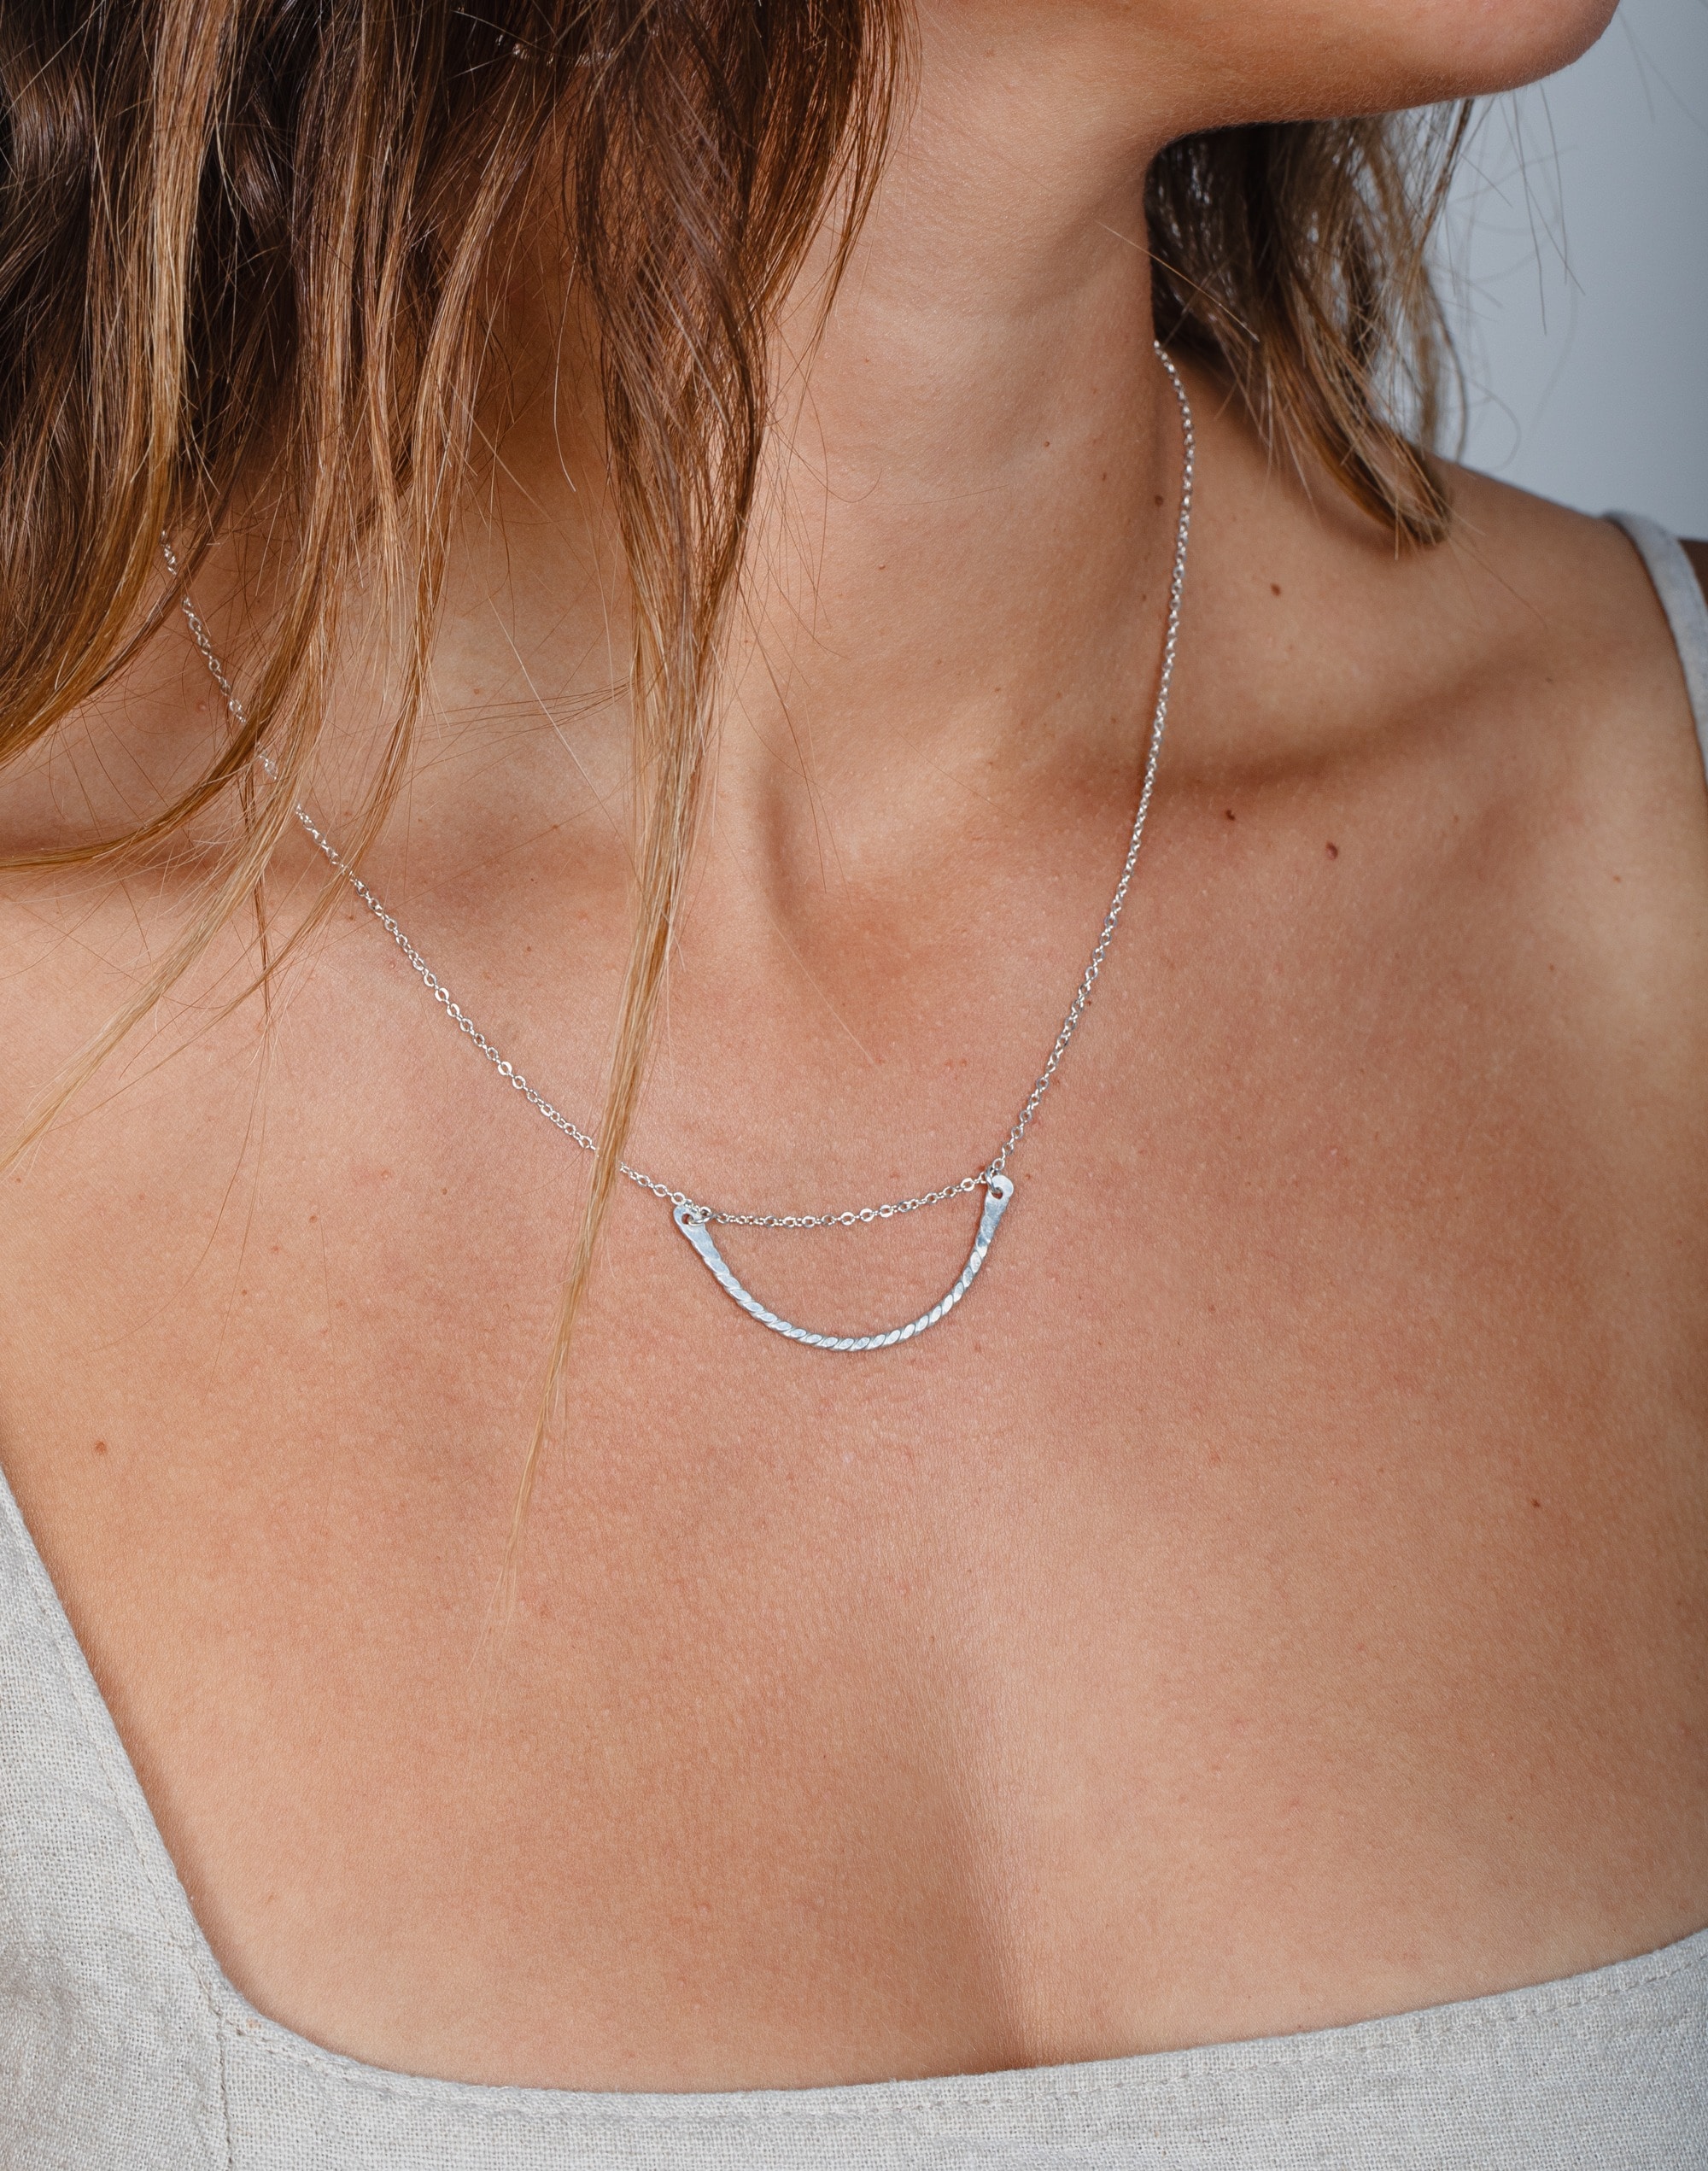 In Situ Jewelry Sterling Silver Serena Necklace